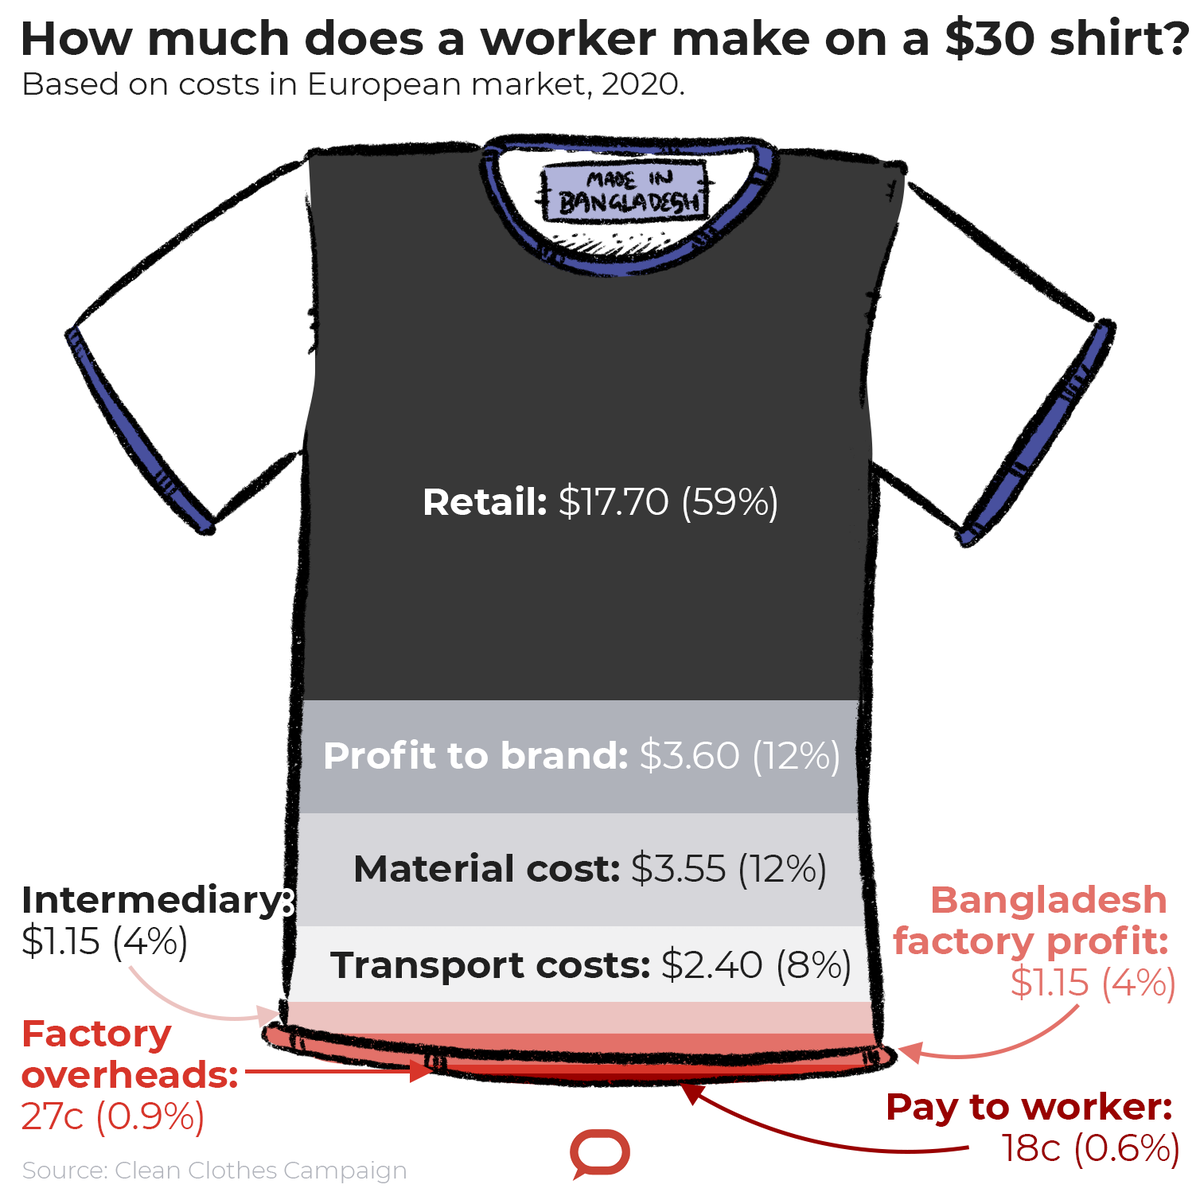 A graphic showing that for a $ 30 shirt, the retailer earns the most at $ 17.70, and the worker earns the least at $ 0.18